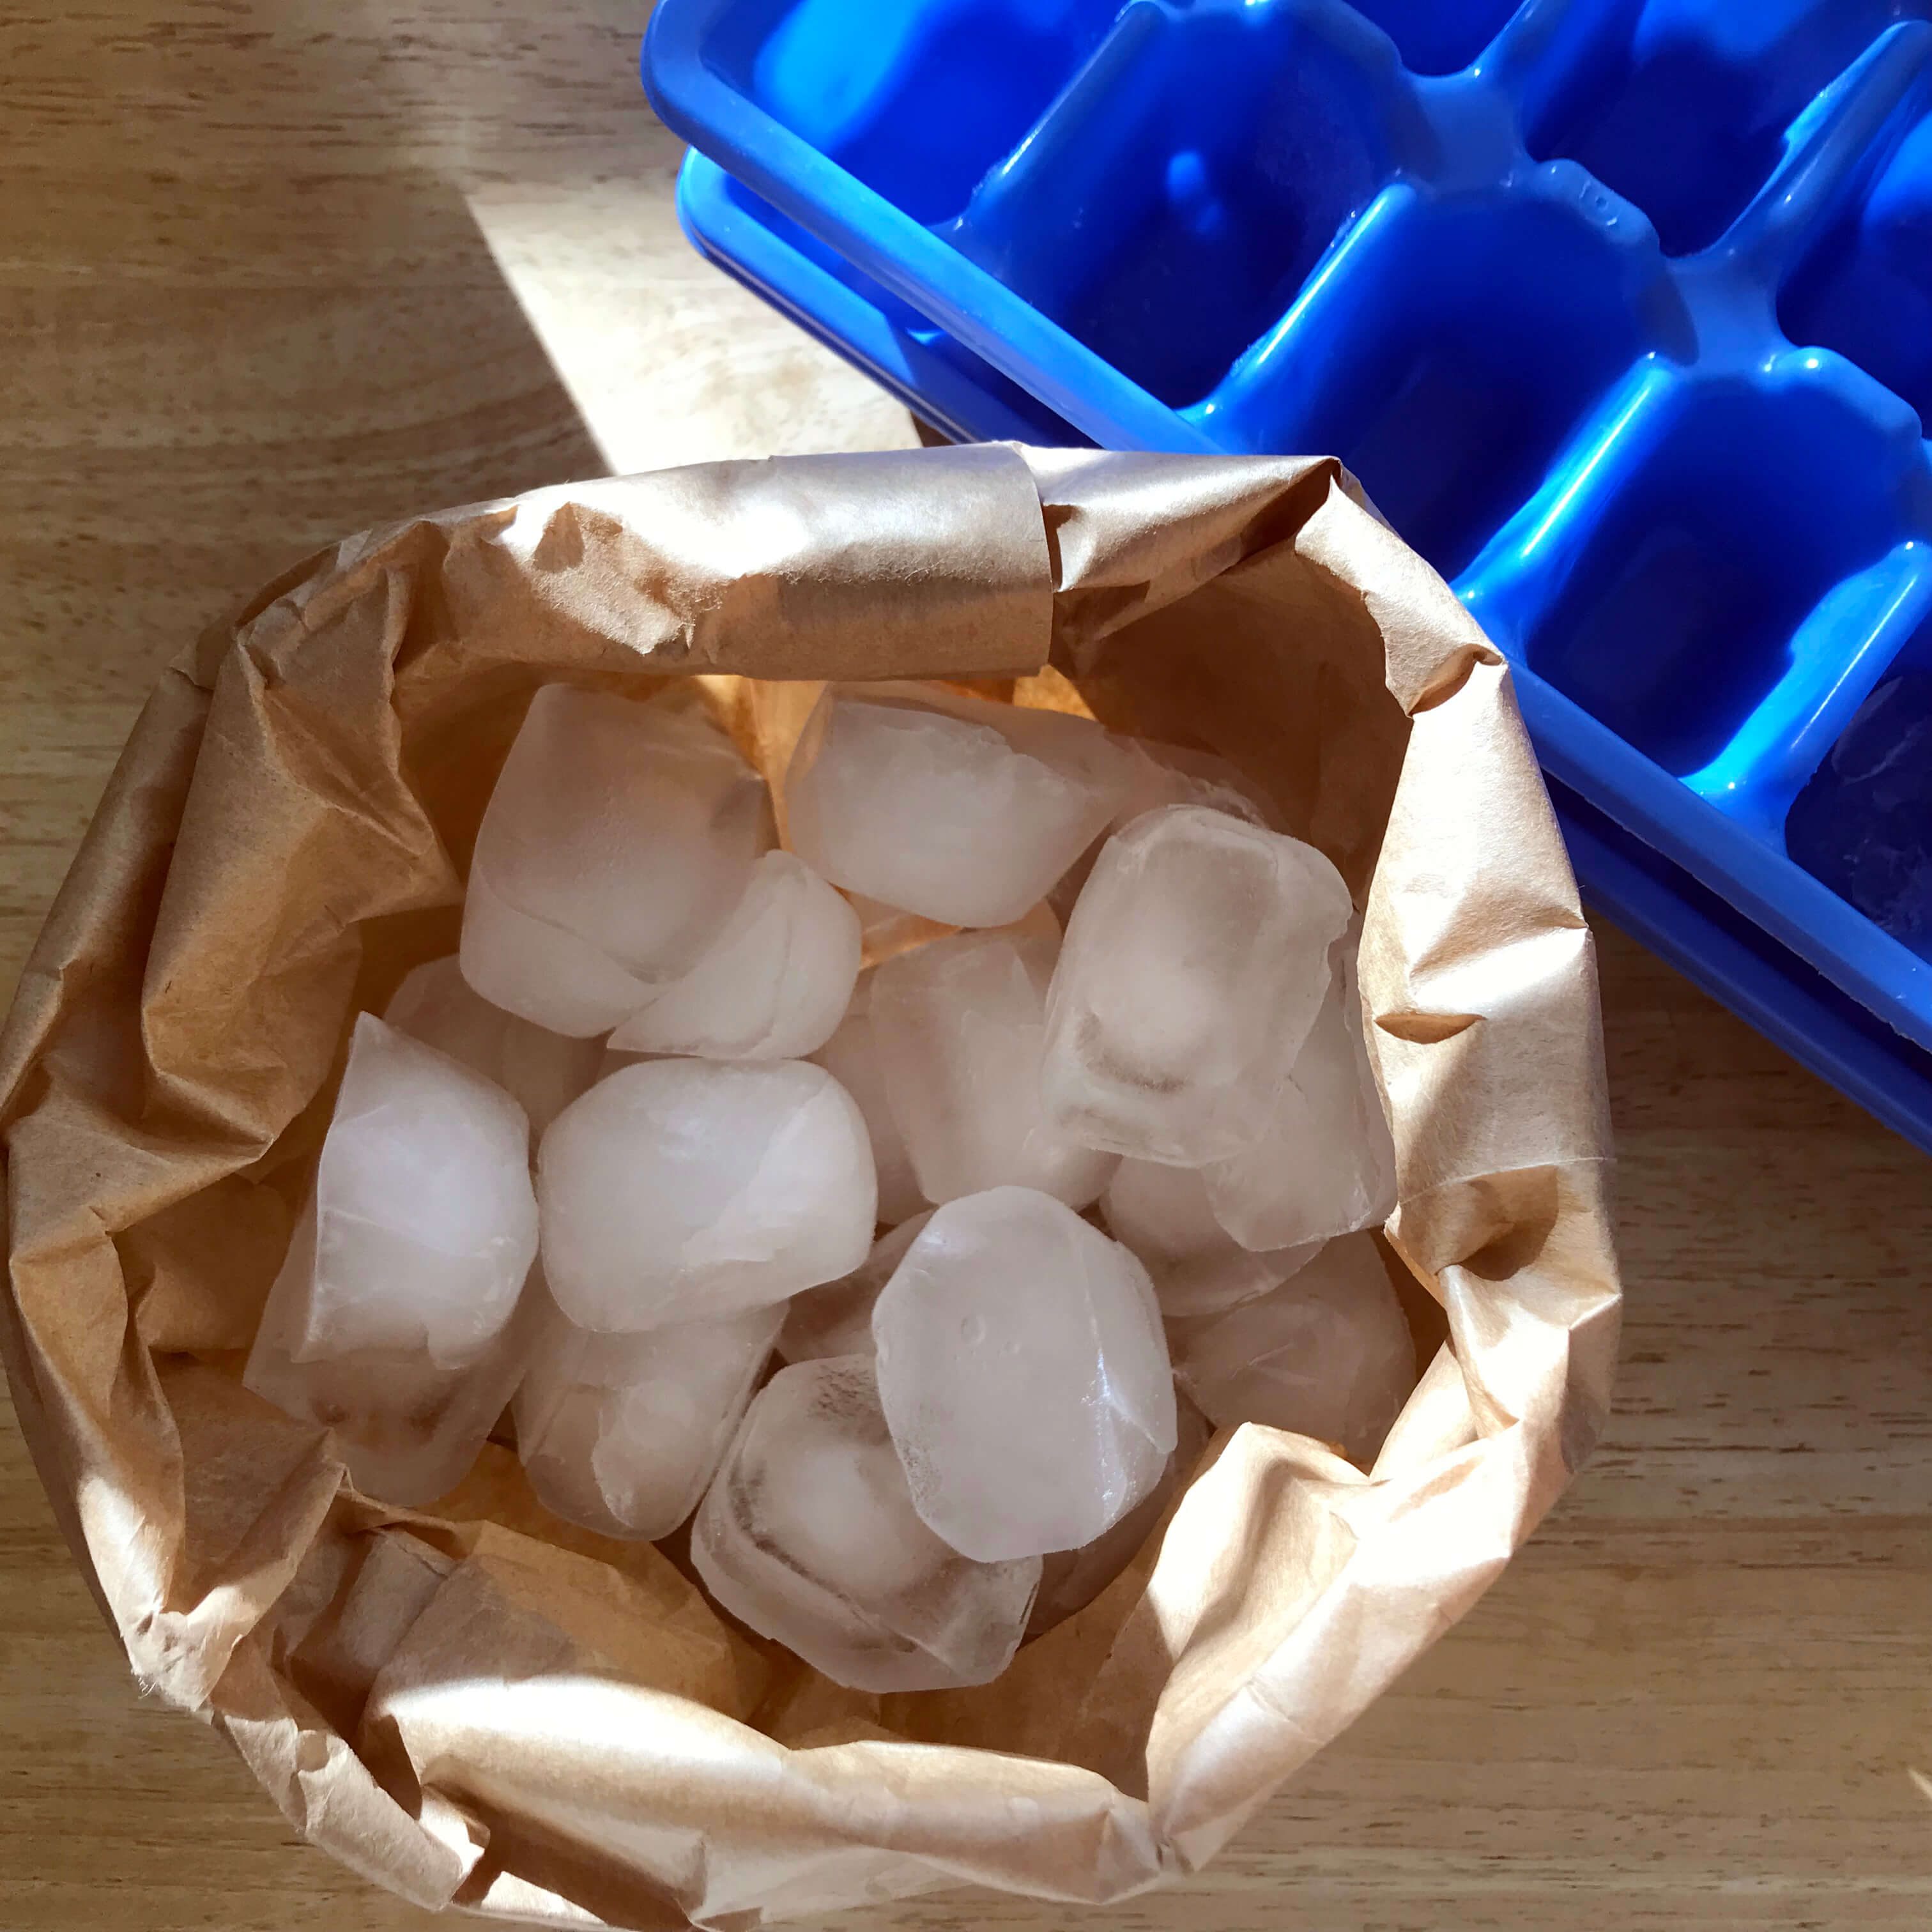 How To Use Ice Cube Bags Because We've Been Doing It Wrong